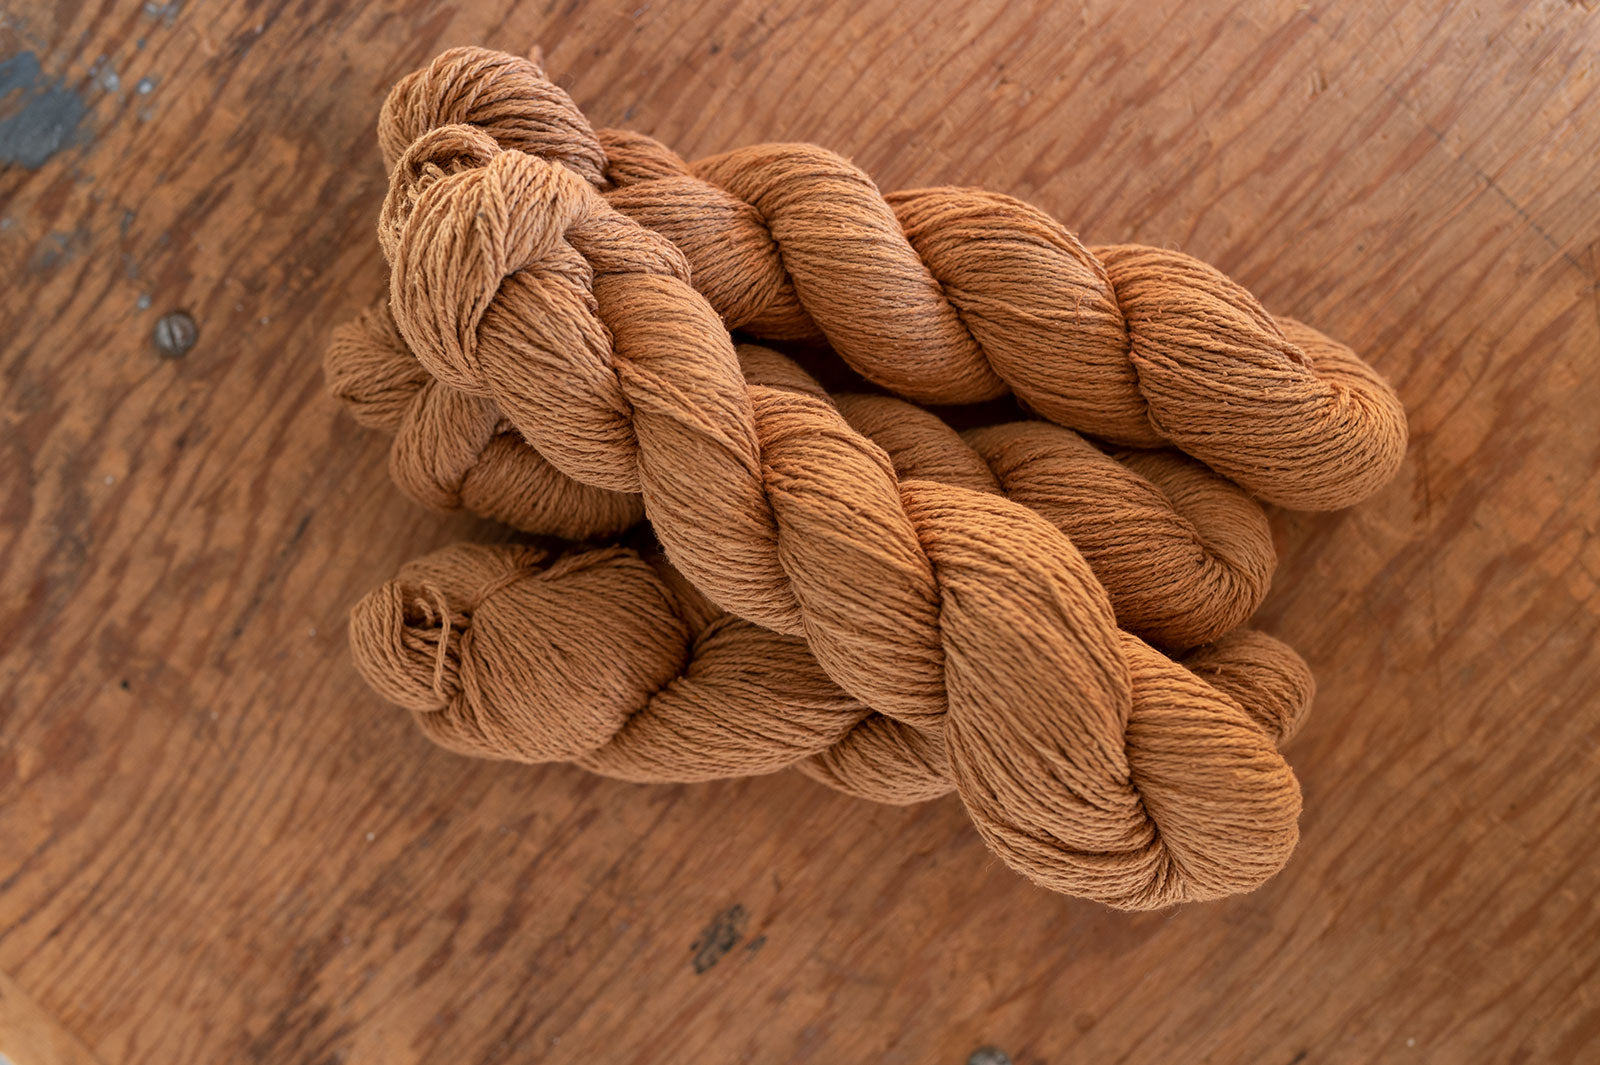 Naturally Dyed Silk Noil - Hand dyed in our studio by Katelin Karbonik